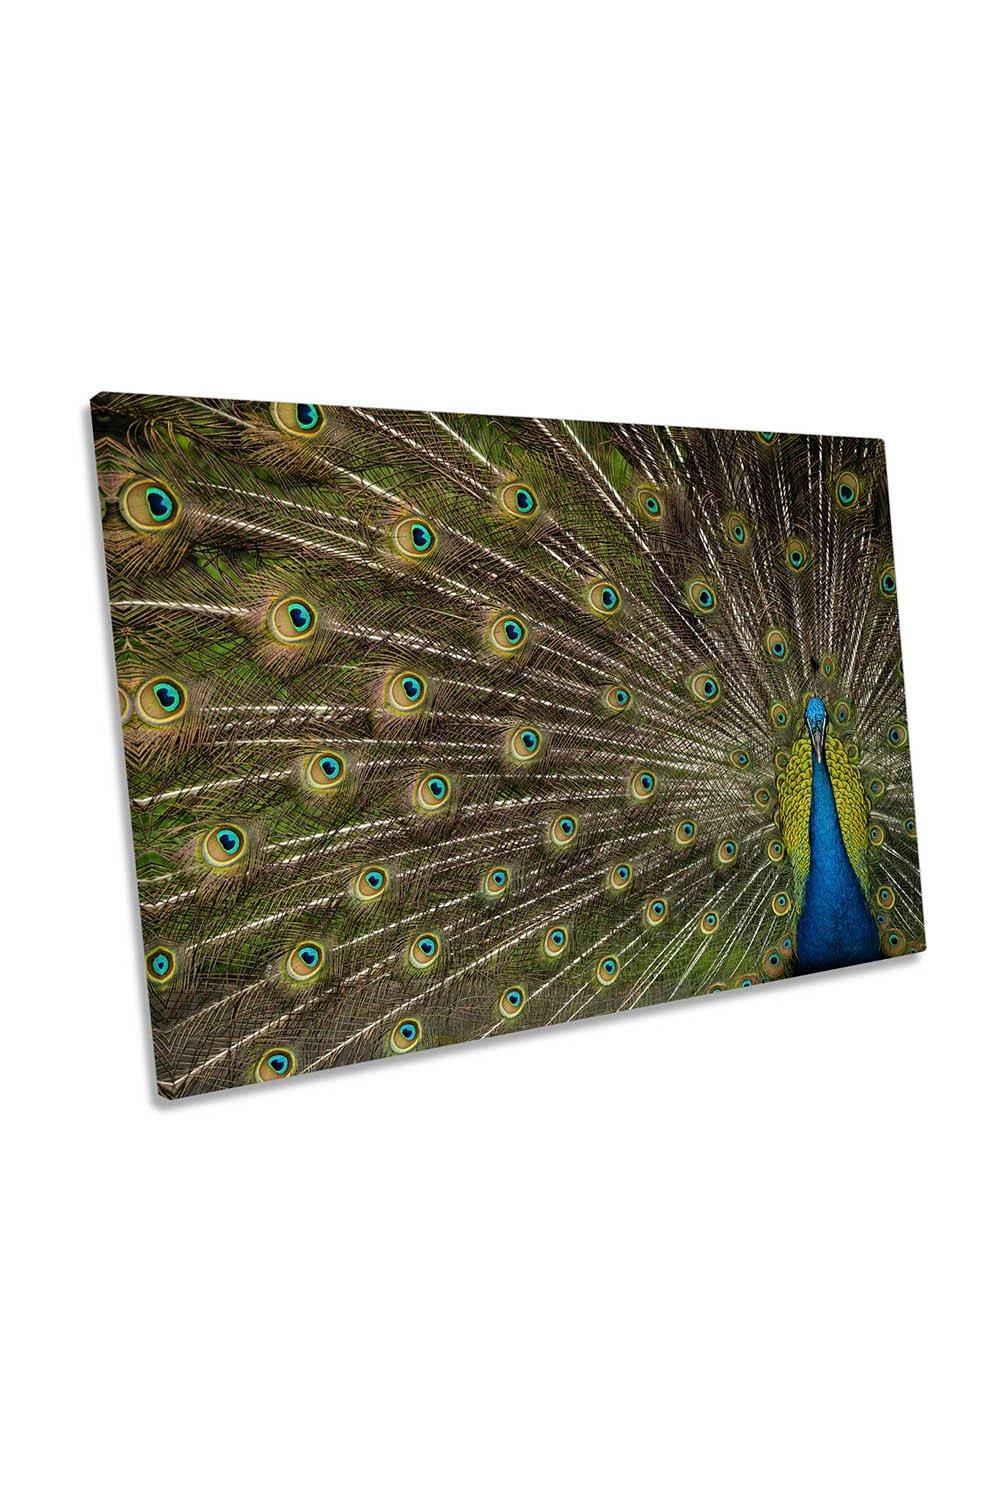 Peacock Flower Green and Blue Canvas Wall Art Picture Print